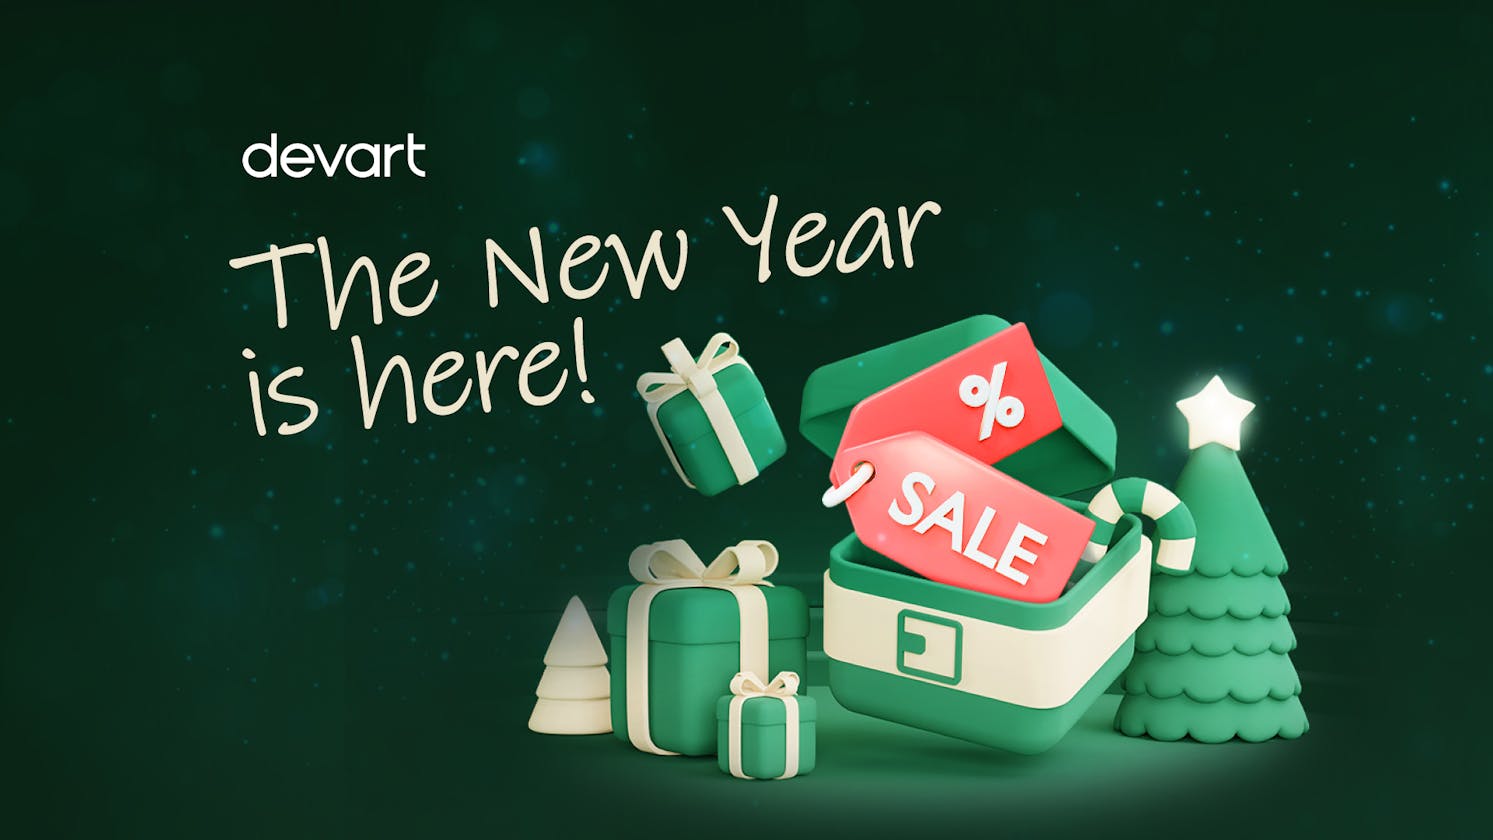 🎉 Unwrap the joy of the season with Devart’s Spectacular Offers!